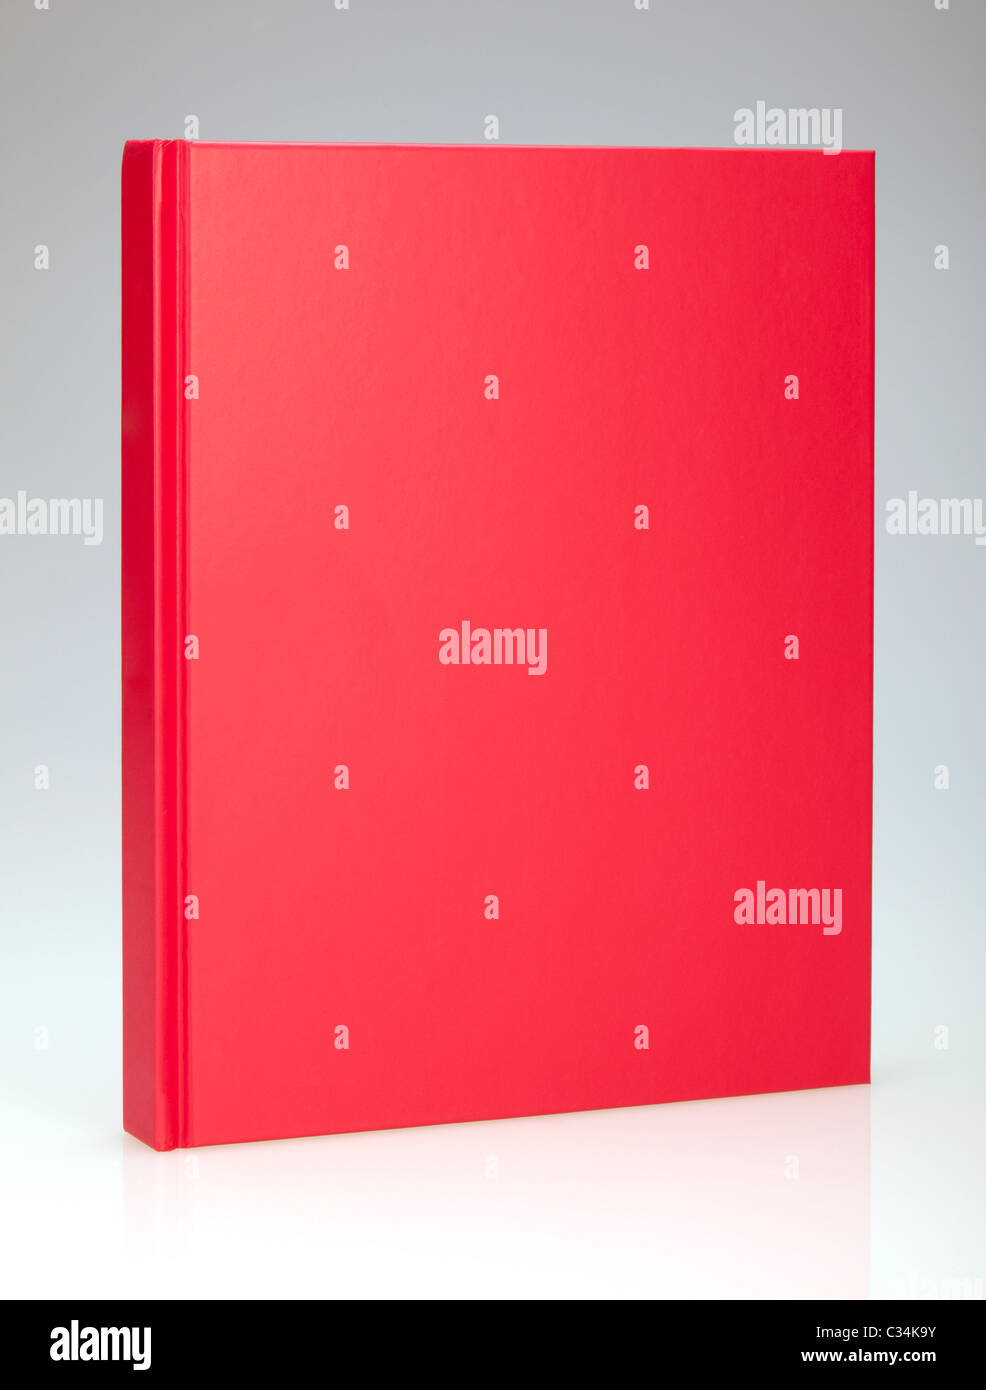 Red book with plain hardcover, for design layout Stock Photo